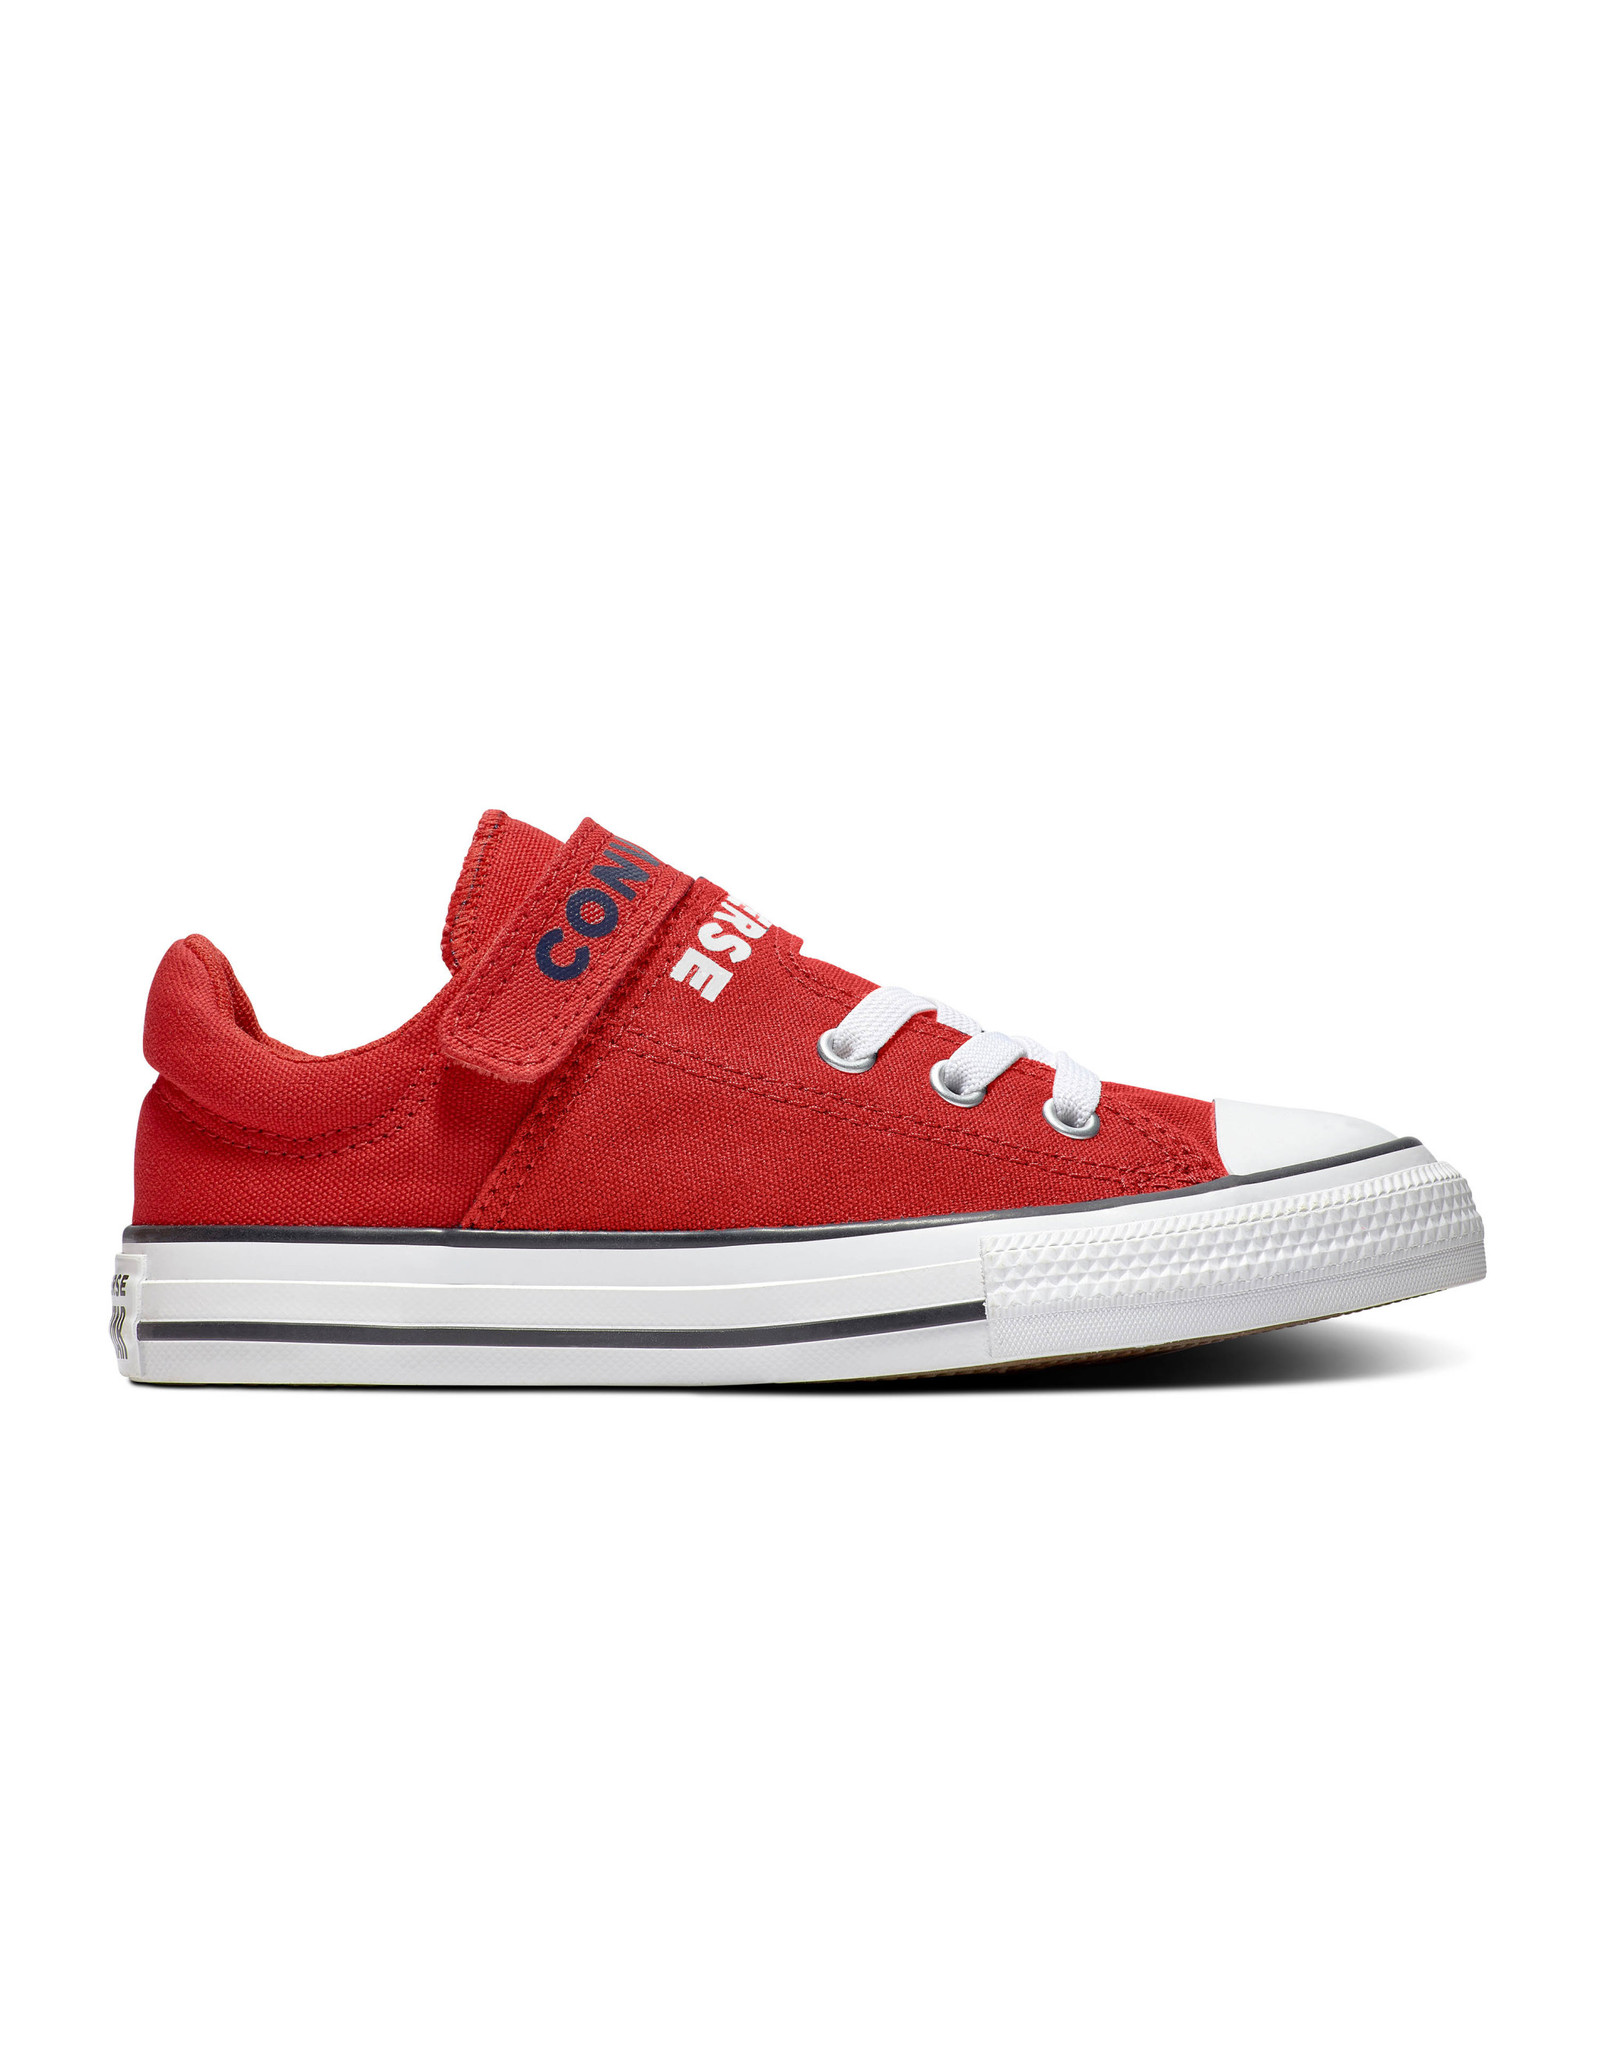 CHUCK TAYLOR ALL STAR  DOUBLE STRAP OX UNIVERSITY RED CAVUR-666930C